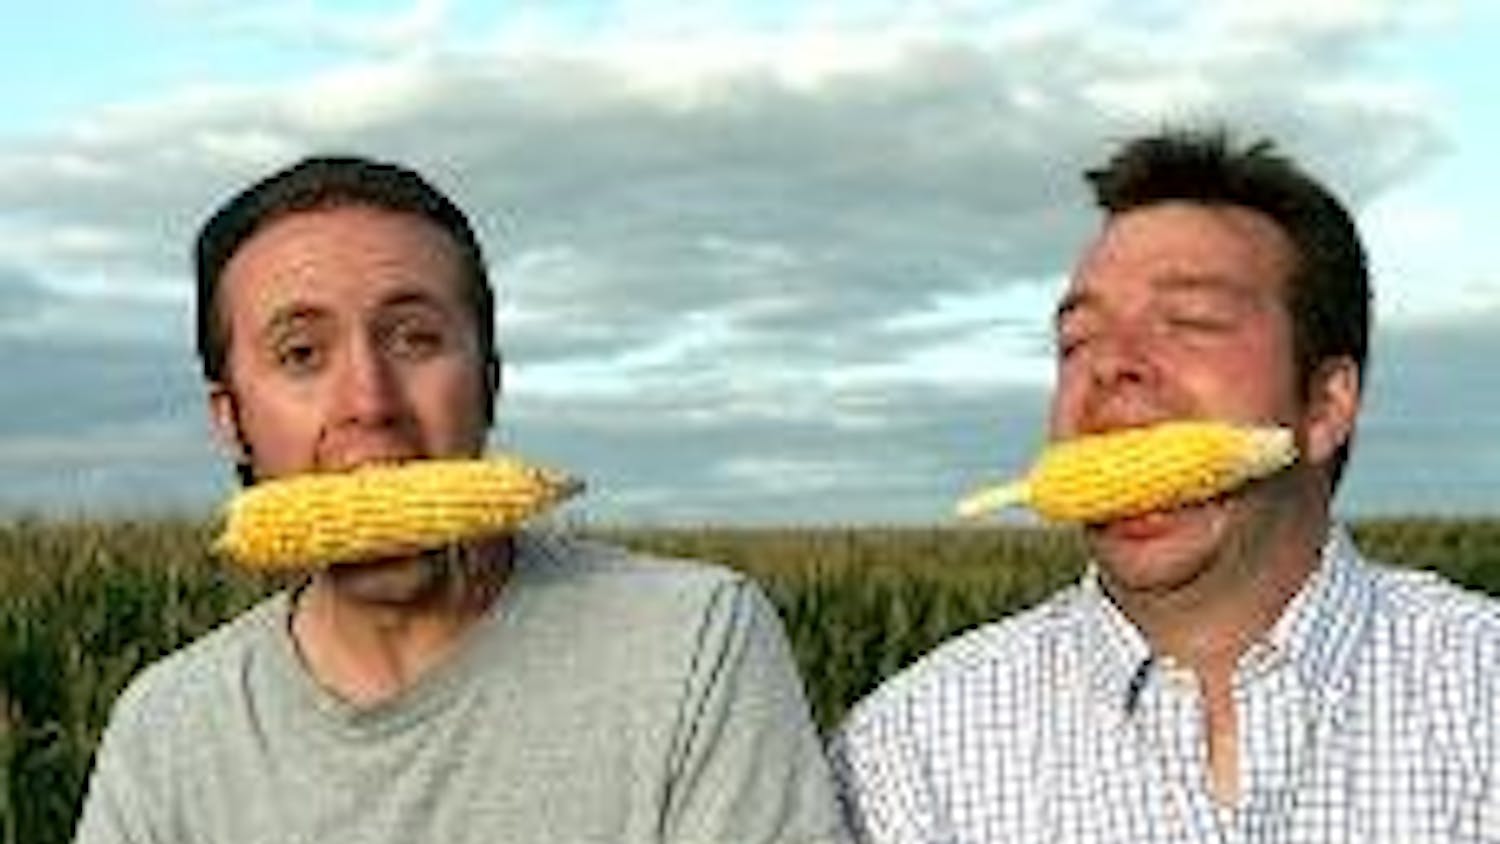 NOT SO CORNY - Best friends Ian Cheney, left, and Curt Ellis explored the production of corn in Greene, Iowa, in their film, "King Corn."